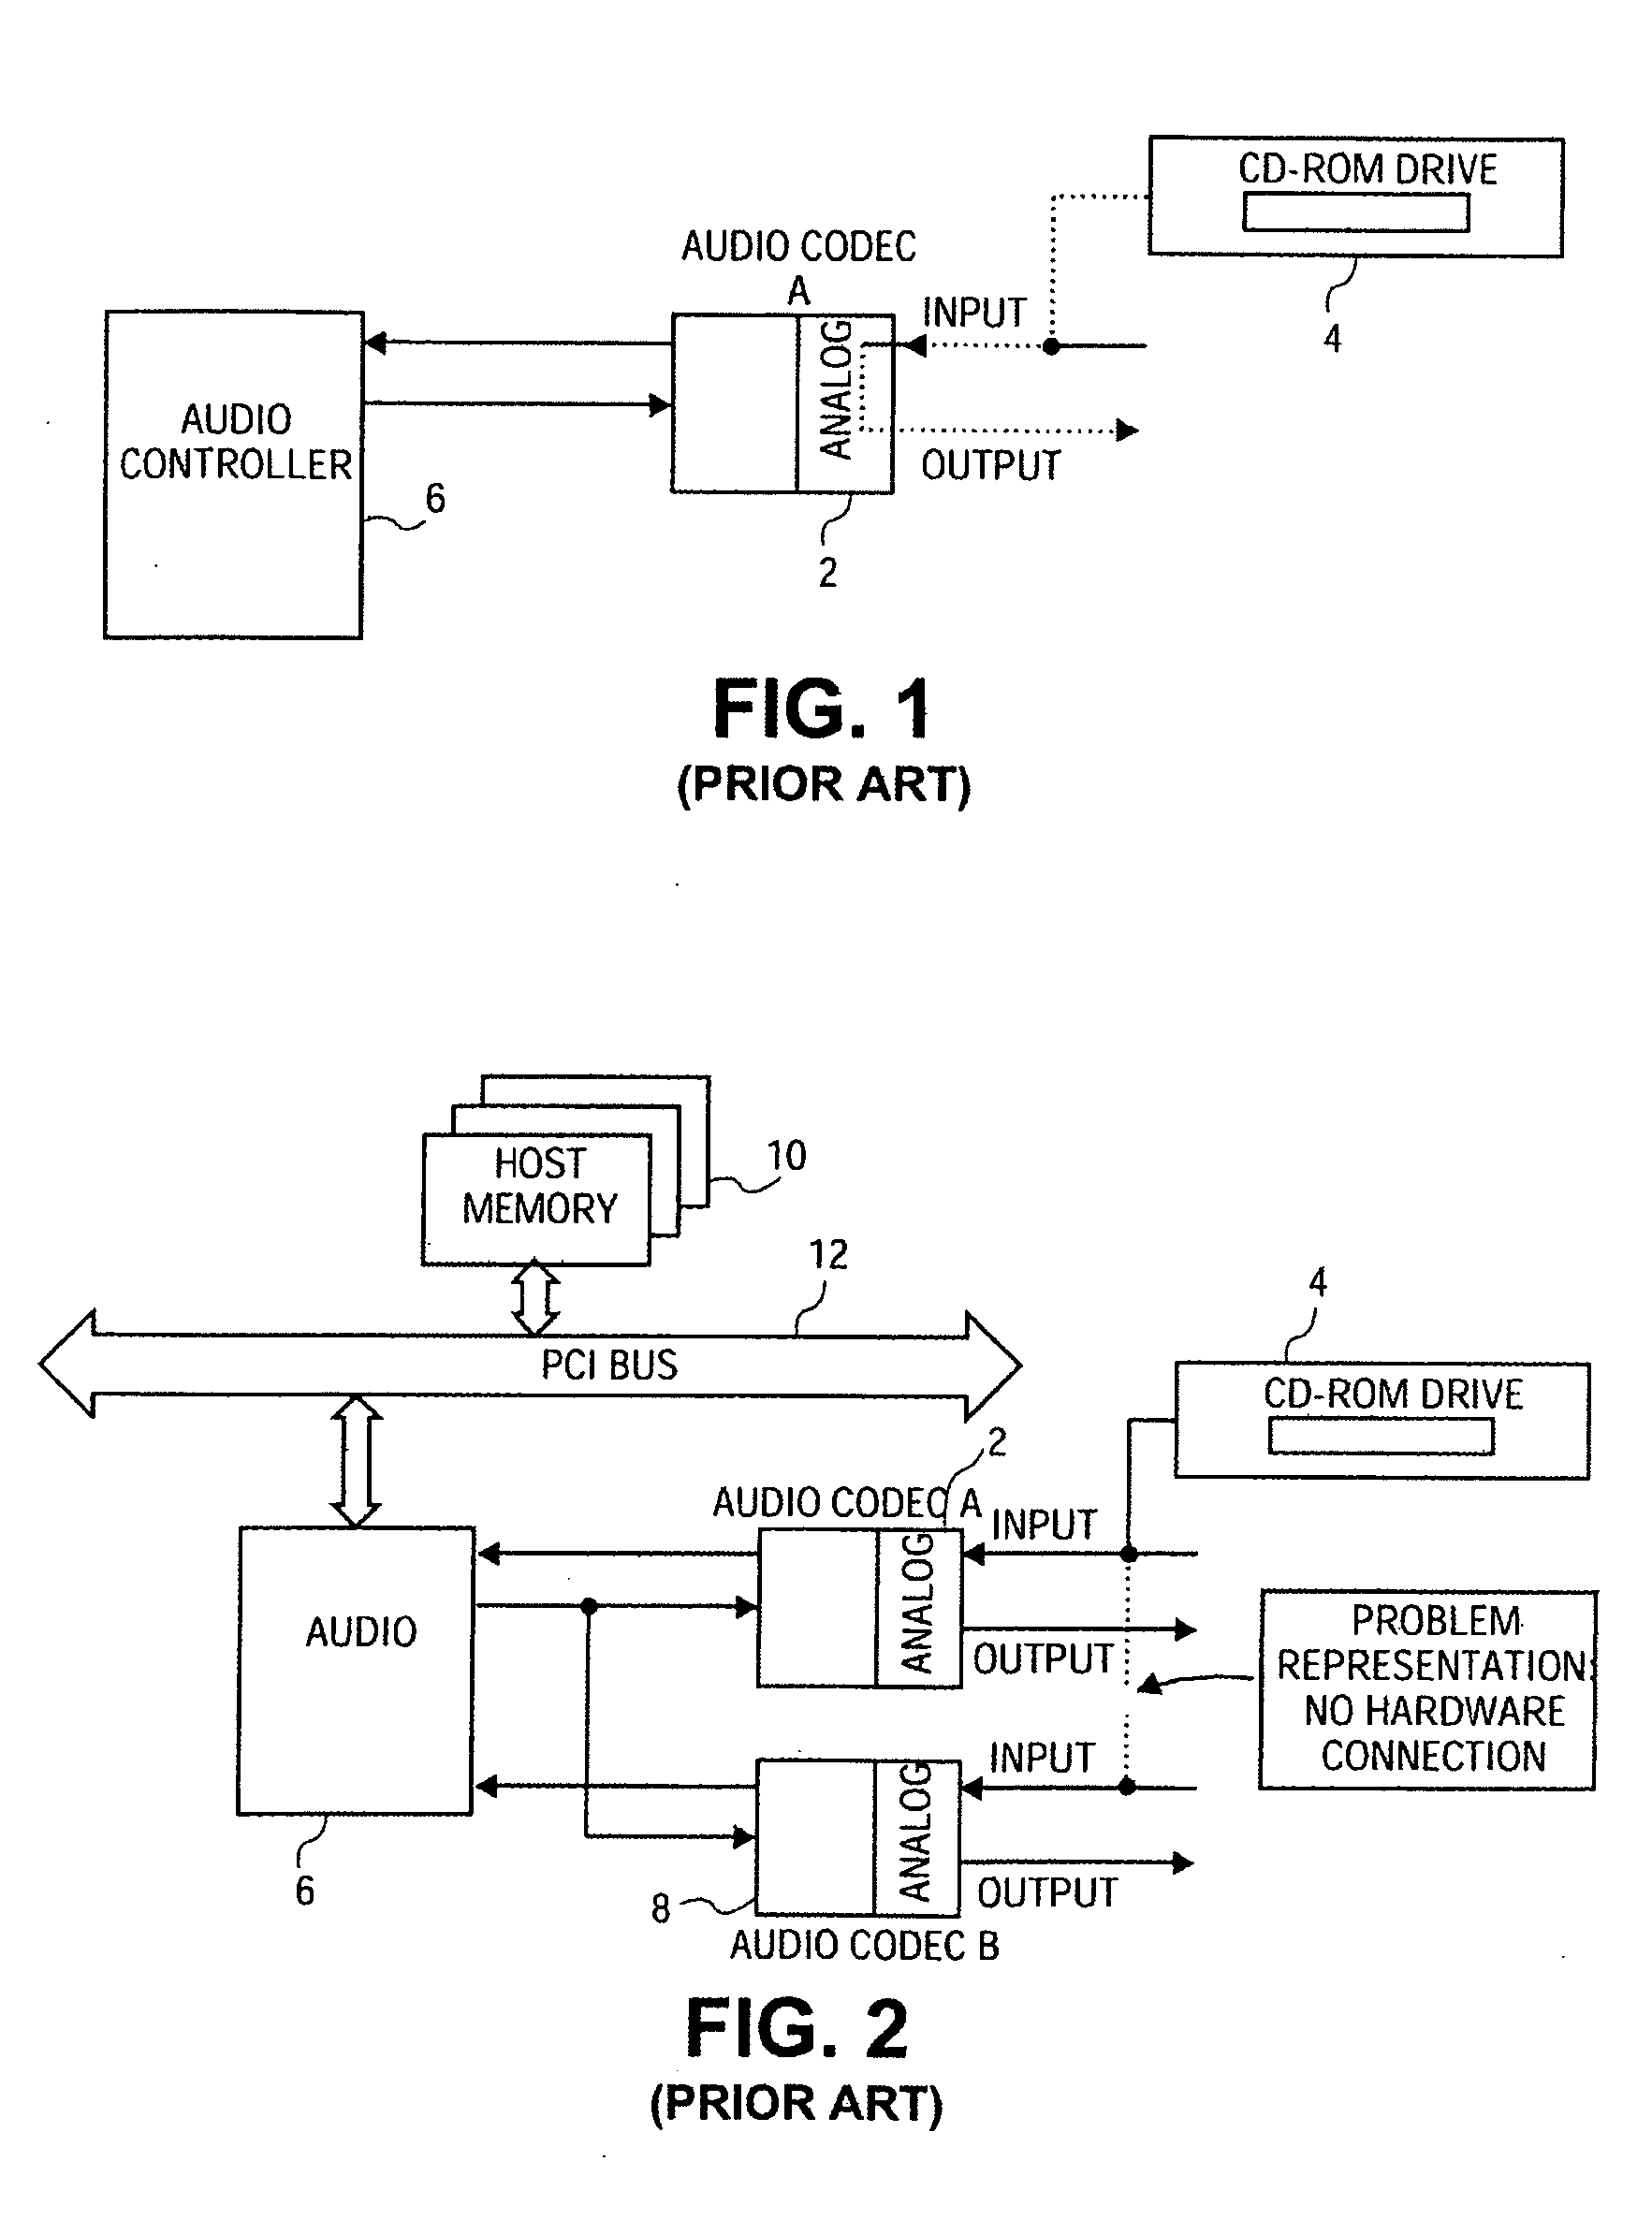 Method and apparatus for playing analog audio to multiple codec outputs